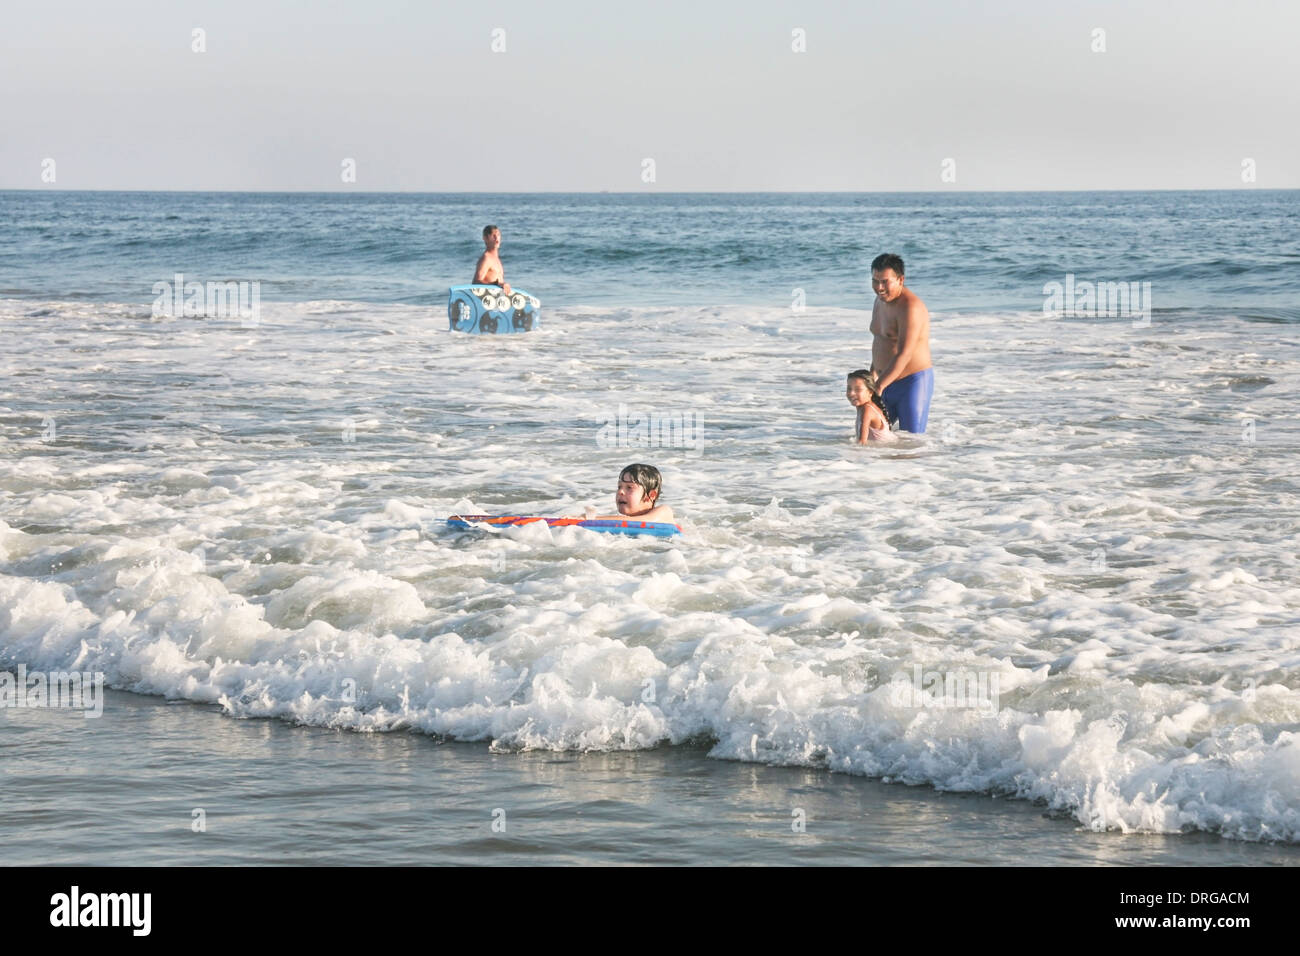 young Mexican boy completes good ride on boogie board as a dad with daughter watch with smiling approval San Agustinillo Mexico Stock Photo